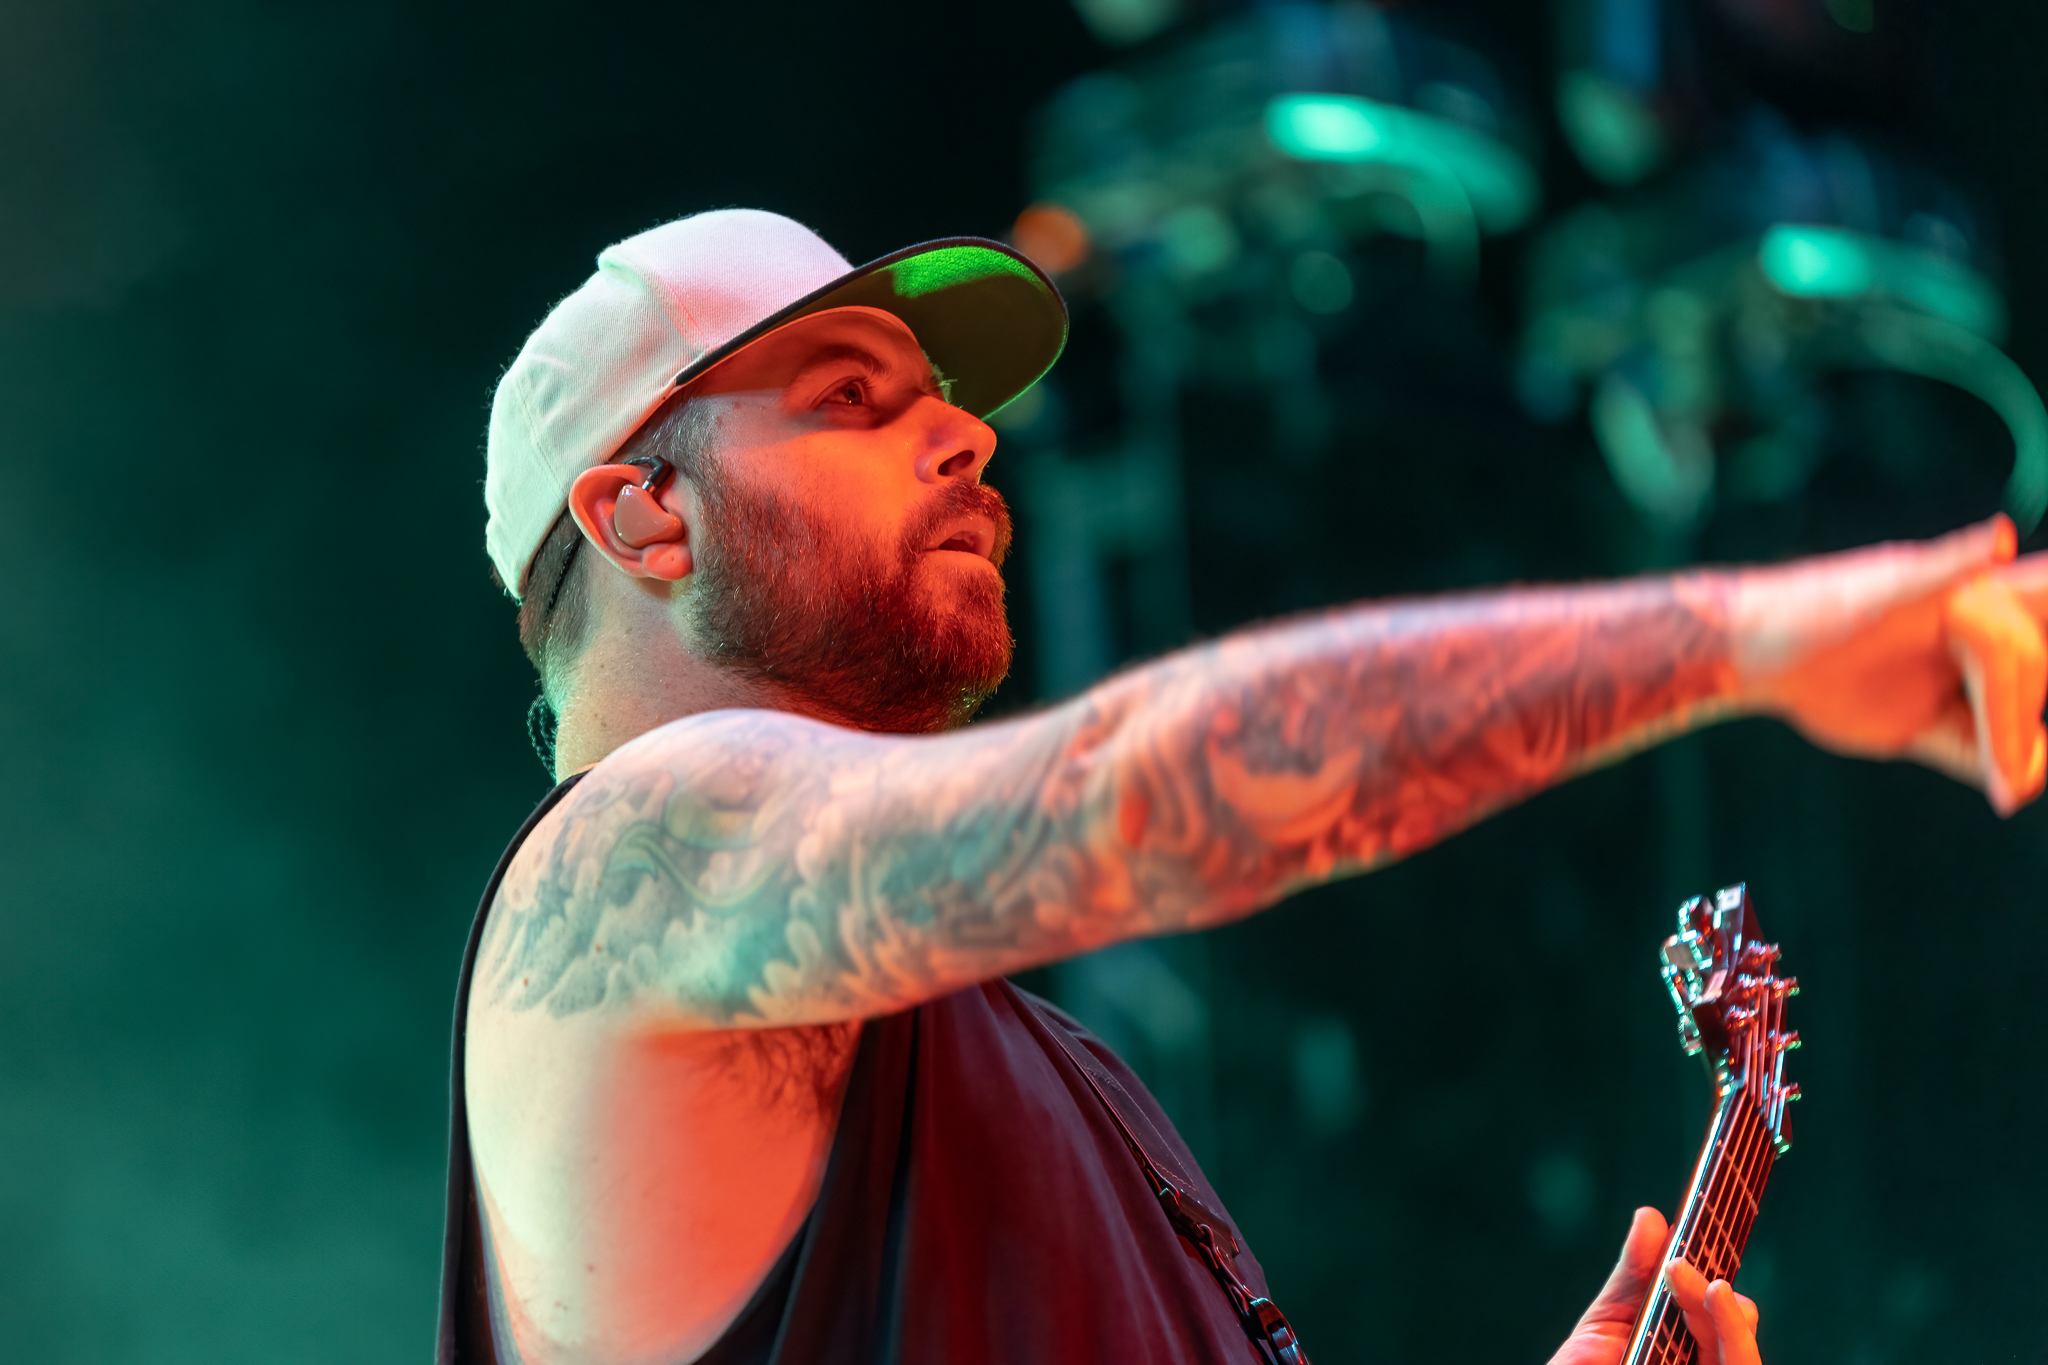 A Day to Remember perform at Moda Center Theater of the Clouds in Portland, Oregon on October 10, 2022.